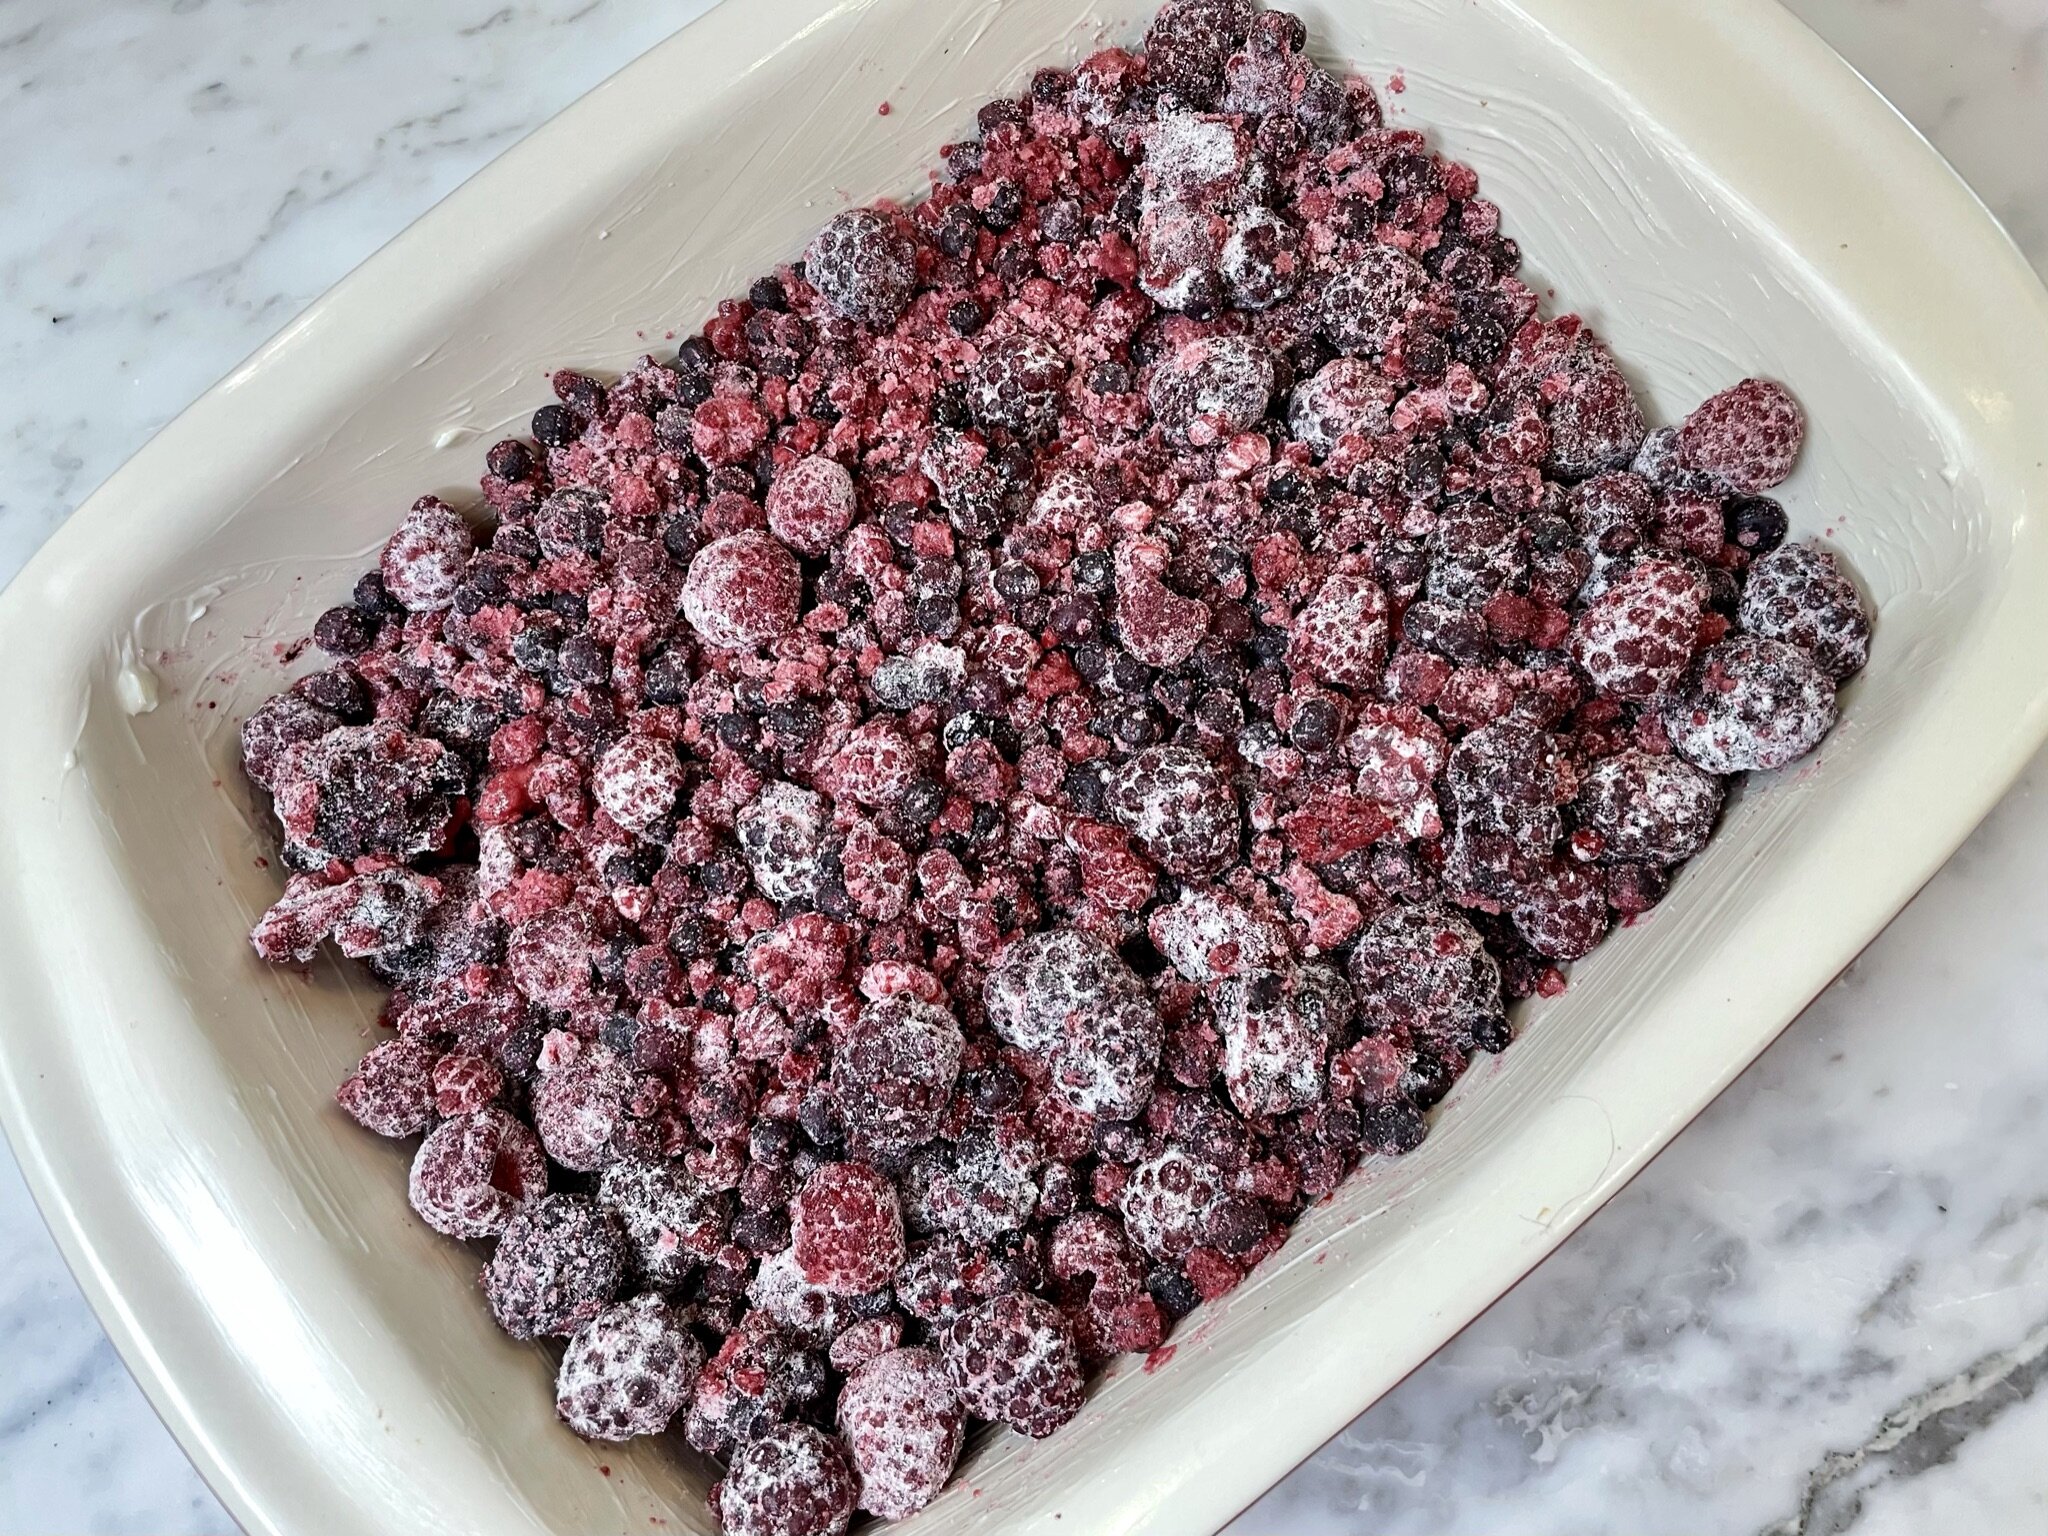 a) Berries into baking pan.